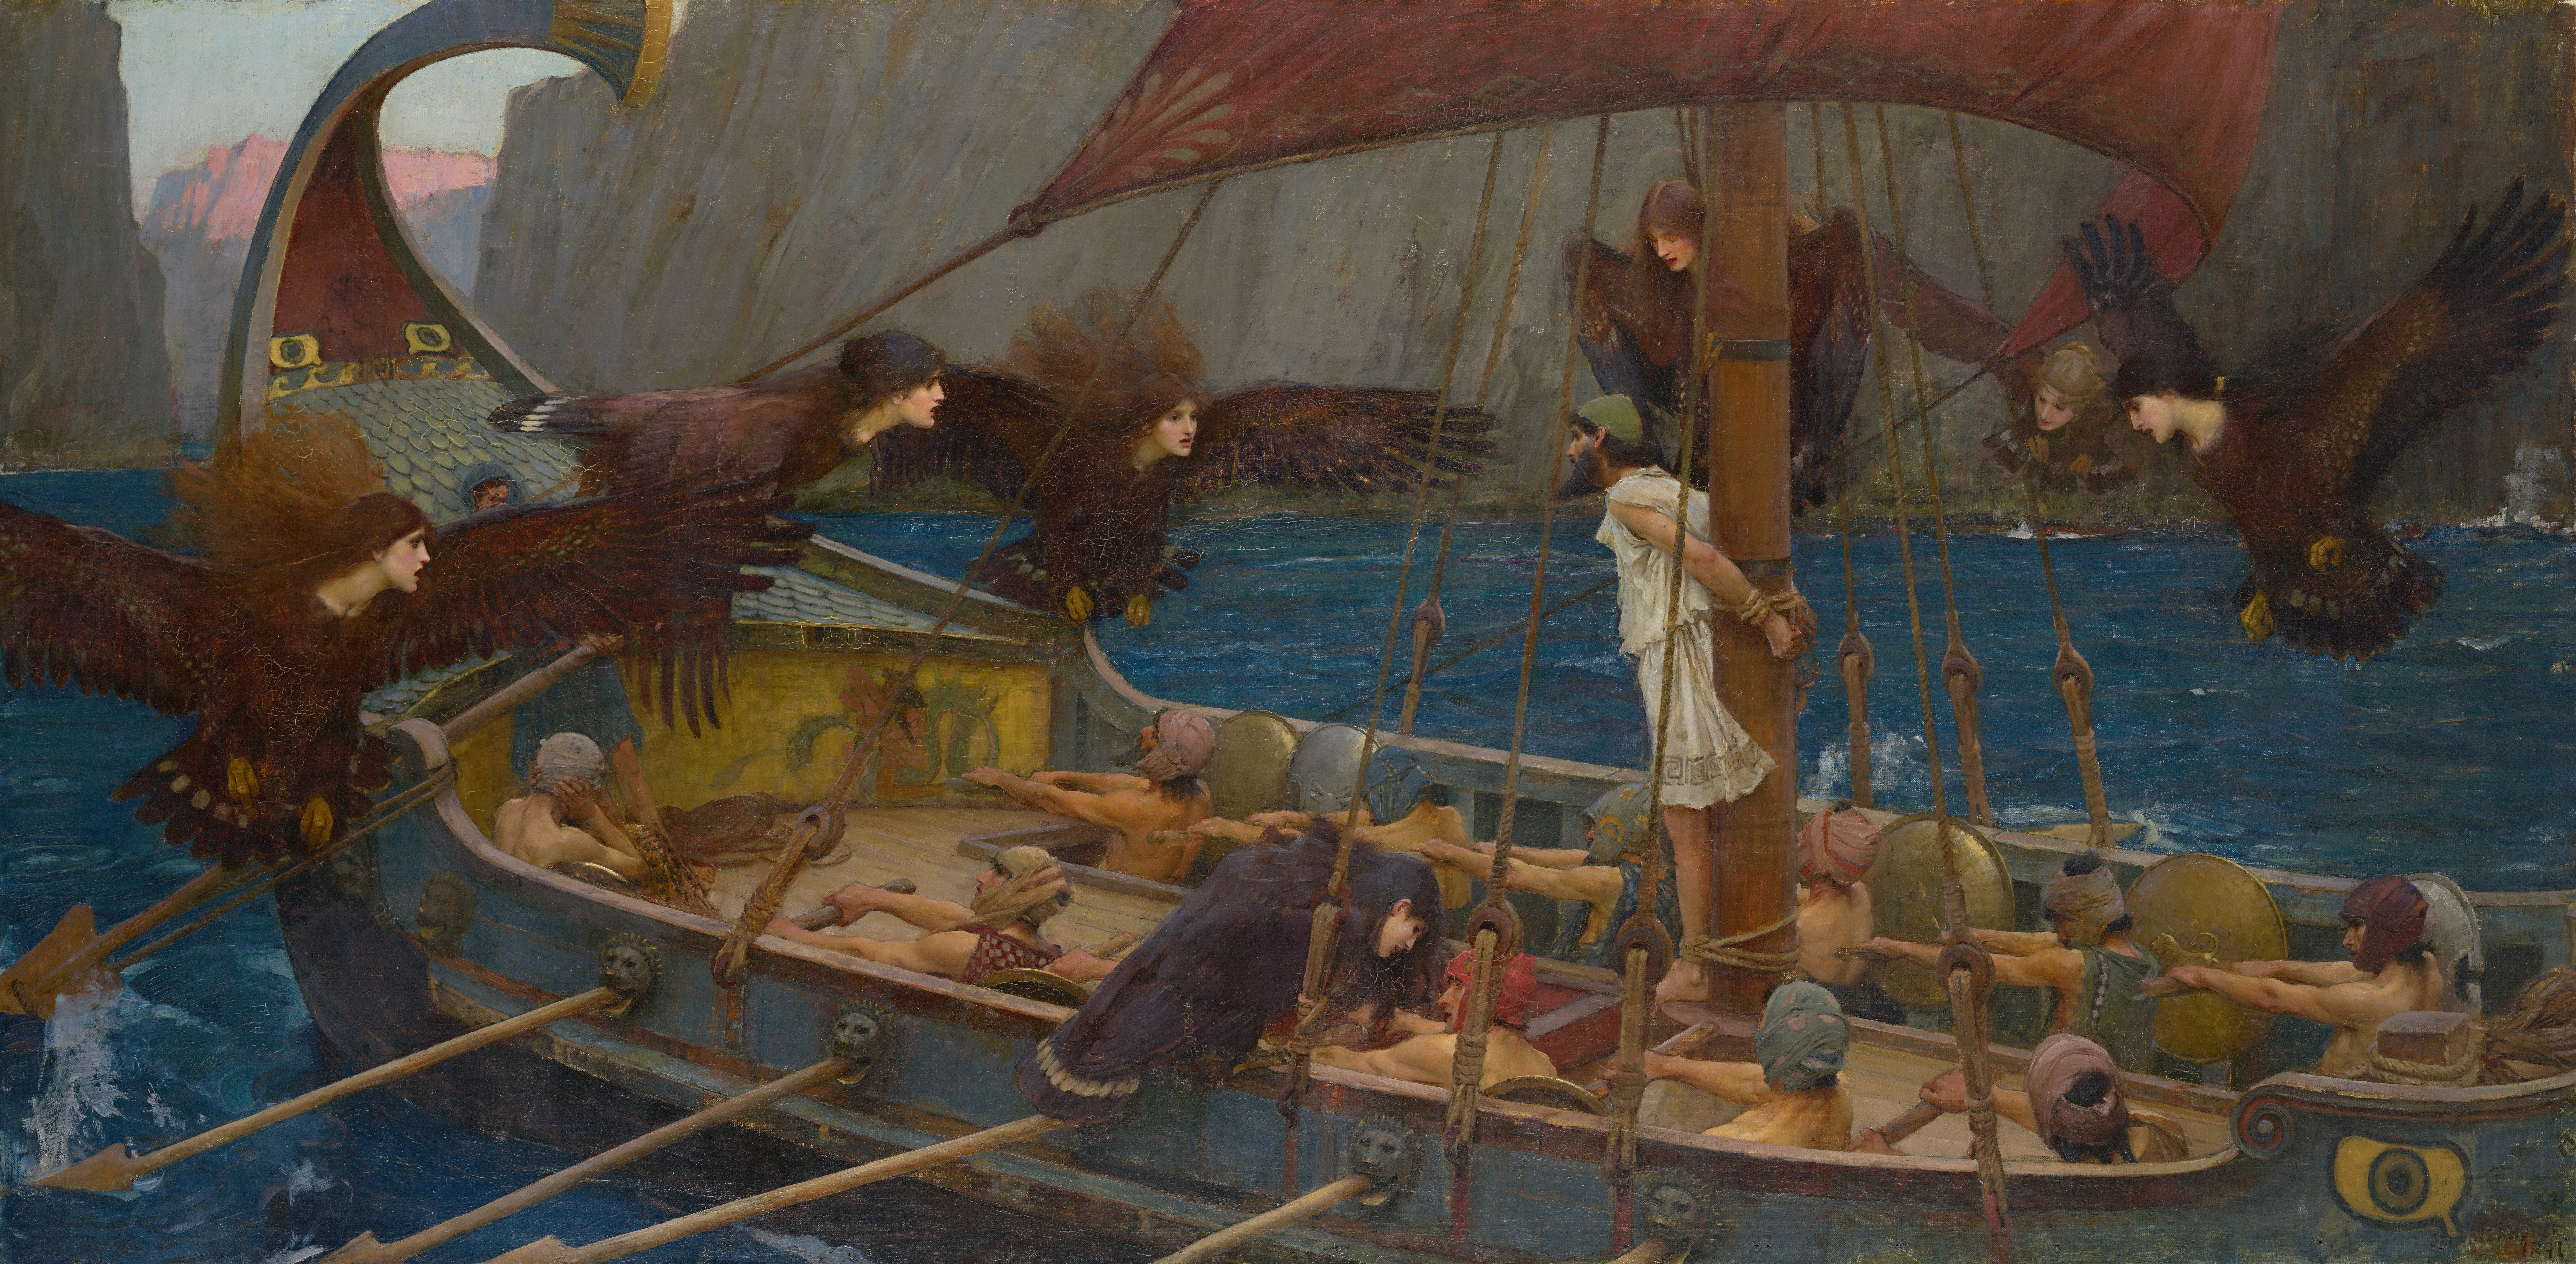 The Greek mythological creatures: John William Waterhouse, Ulysses and the Sirens, 1891, National Gallery of Victoria, Melbourne, Australia.